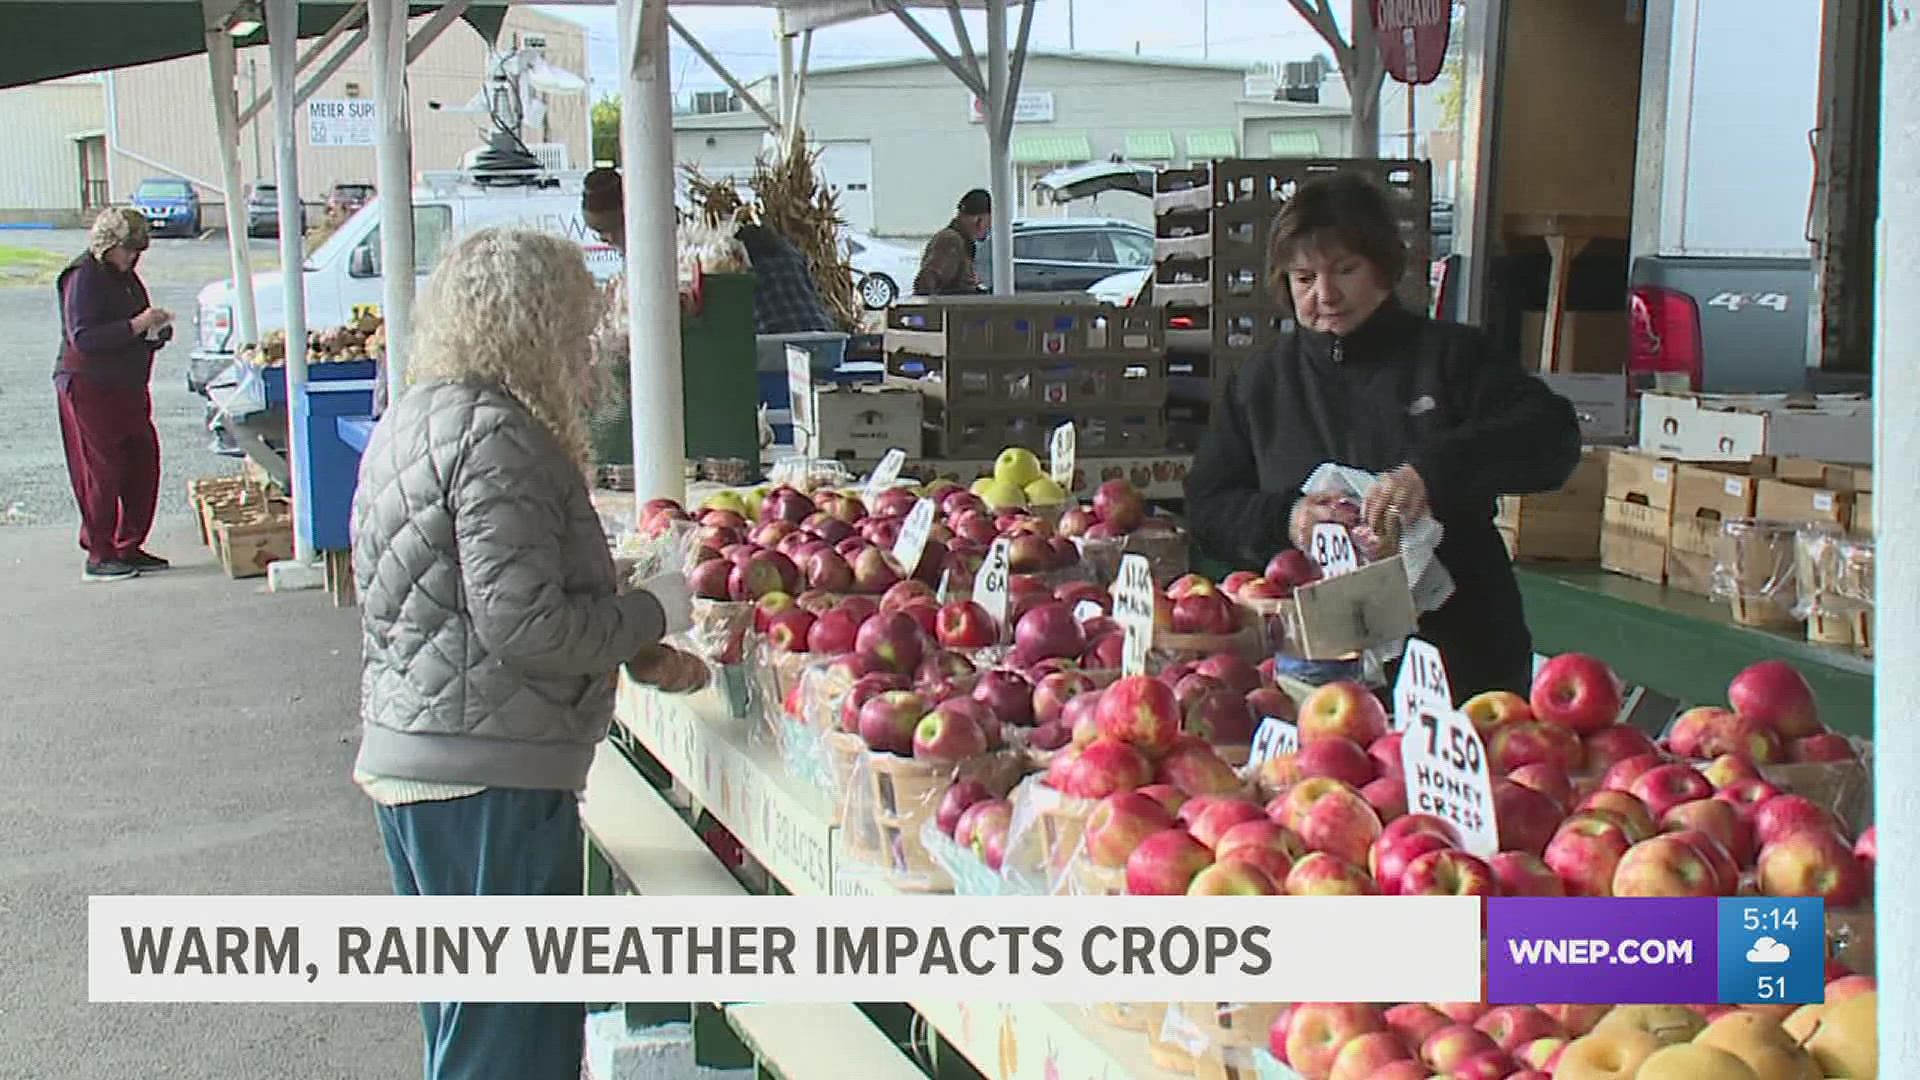 The warmer weather did last longer into the fall than usual this year. We had a lot of rain, too. And that impacted a lot of crops for farmers in our area.